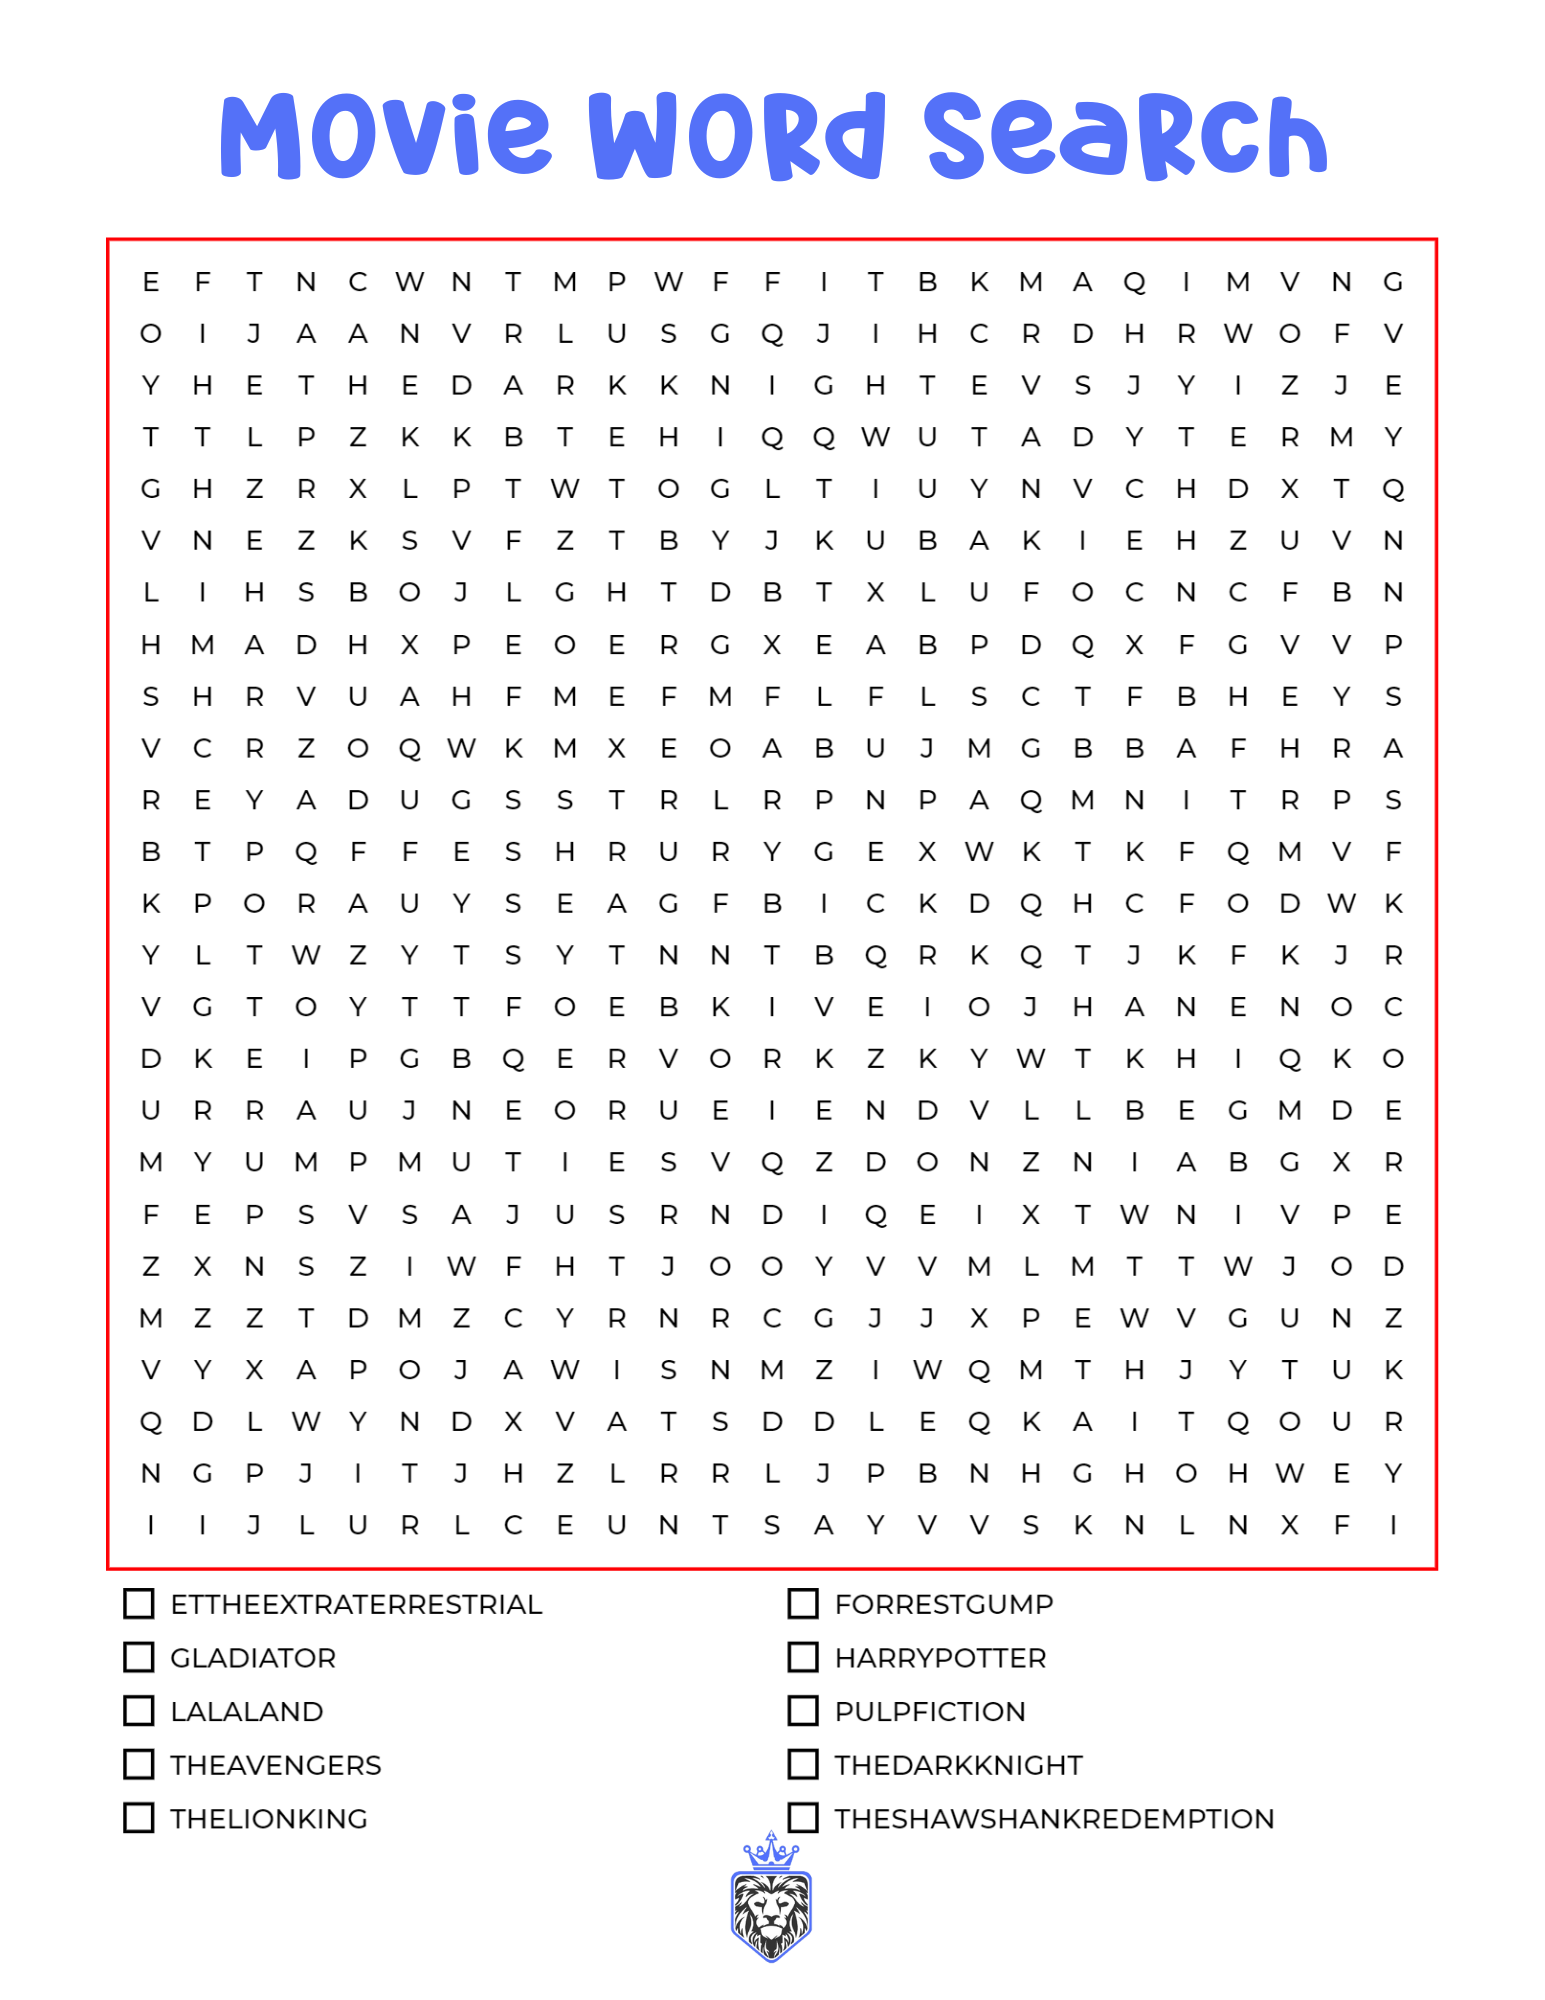 Free Movie WordSearch